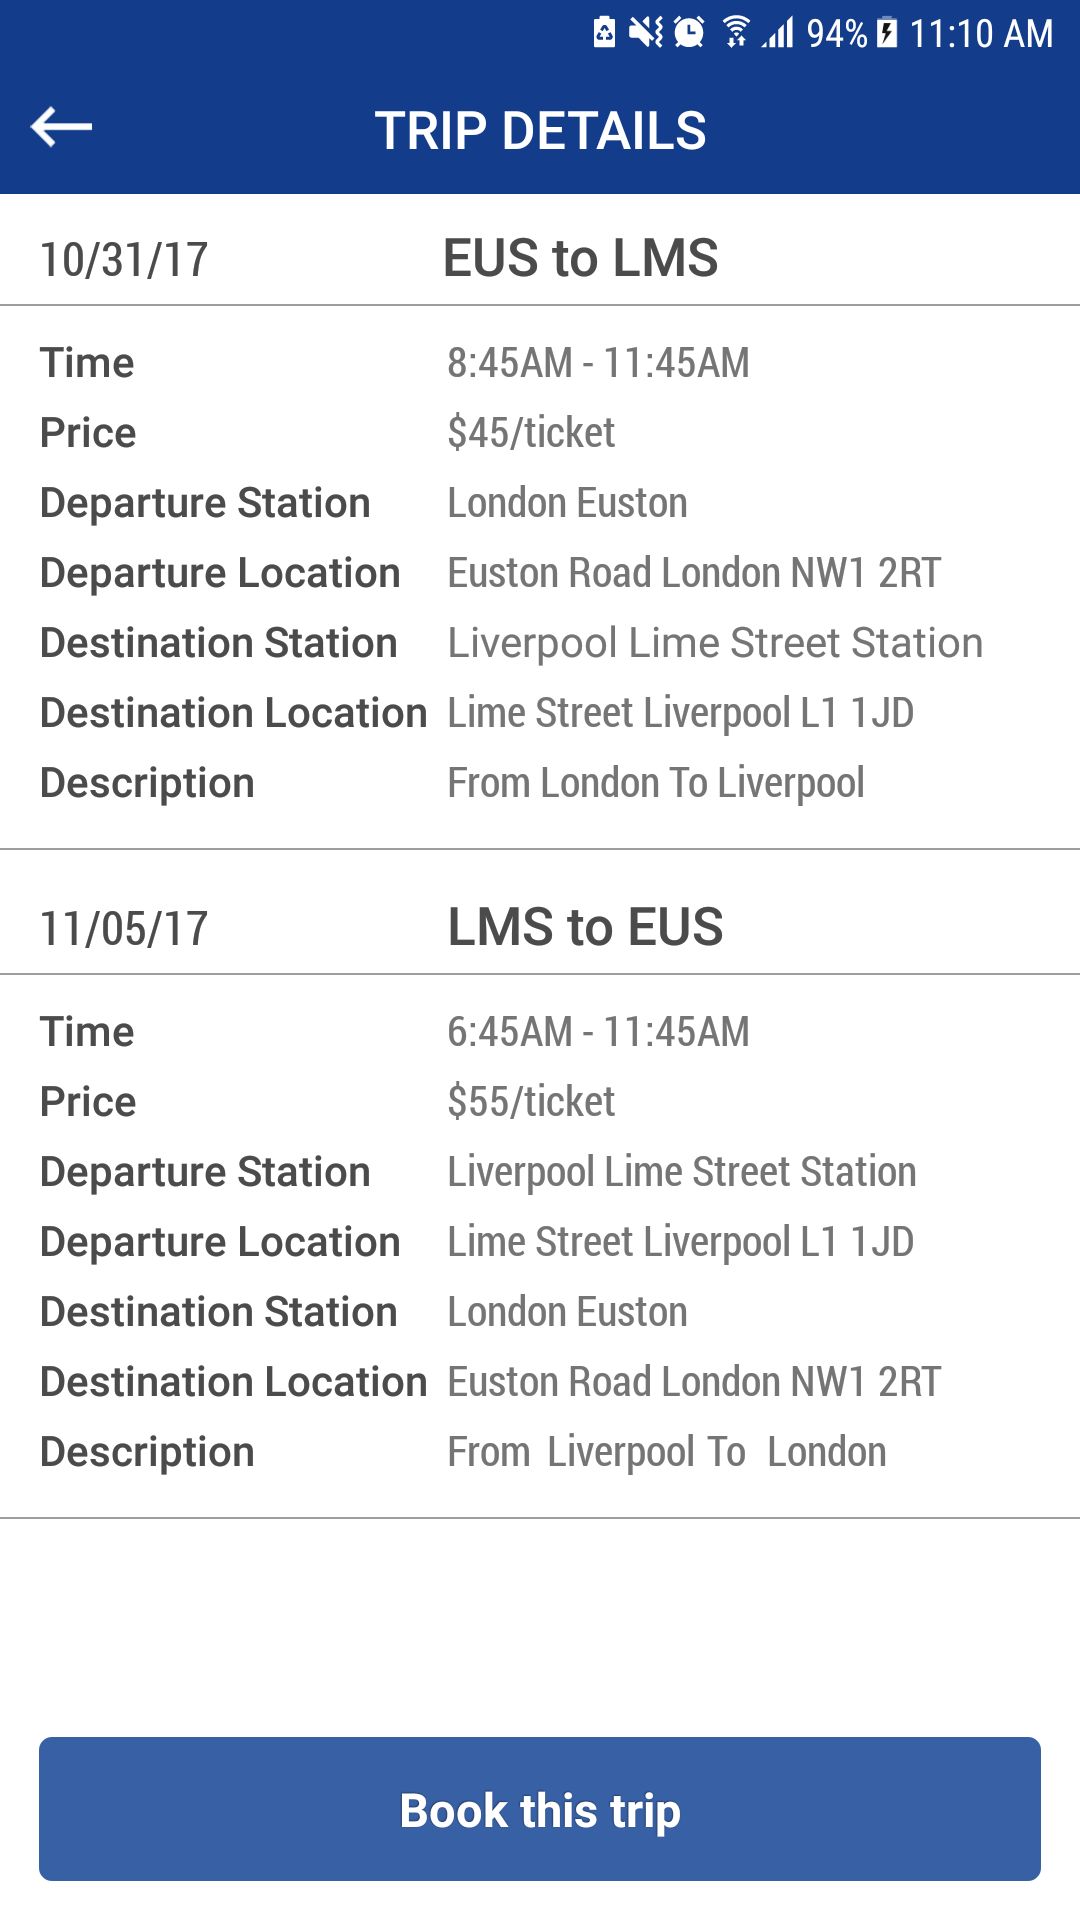 Bus Ticket Booking - Android App Source Code by Hicomsolutions | Codester